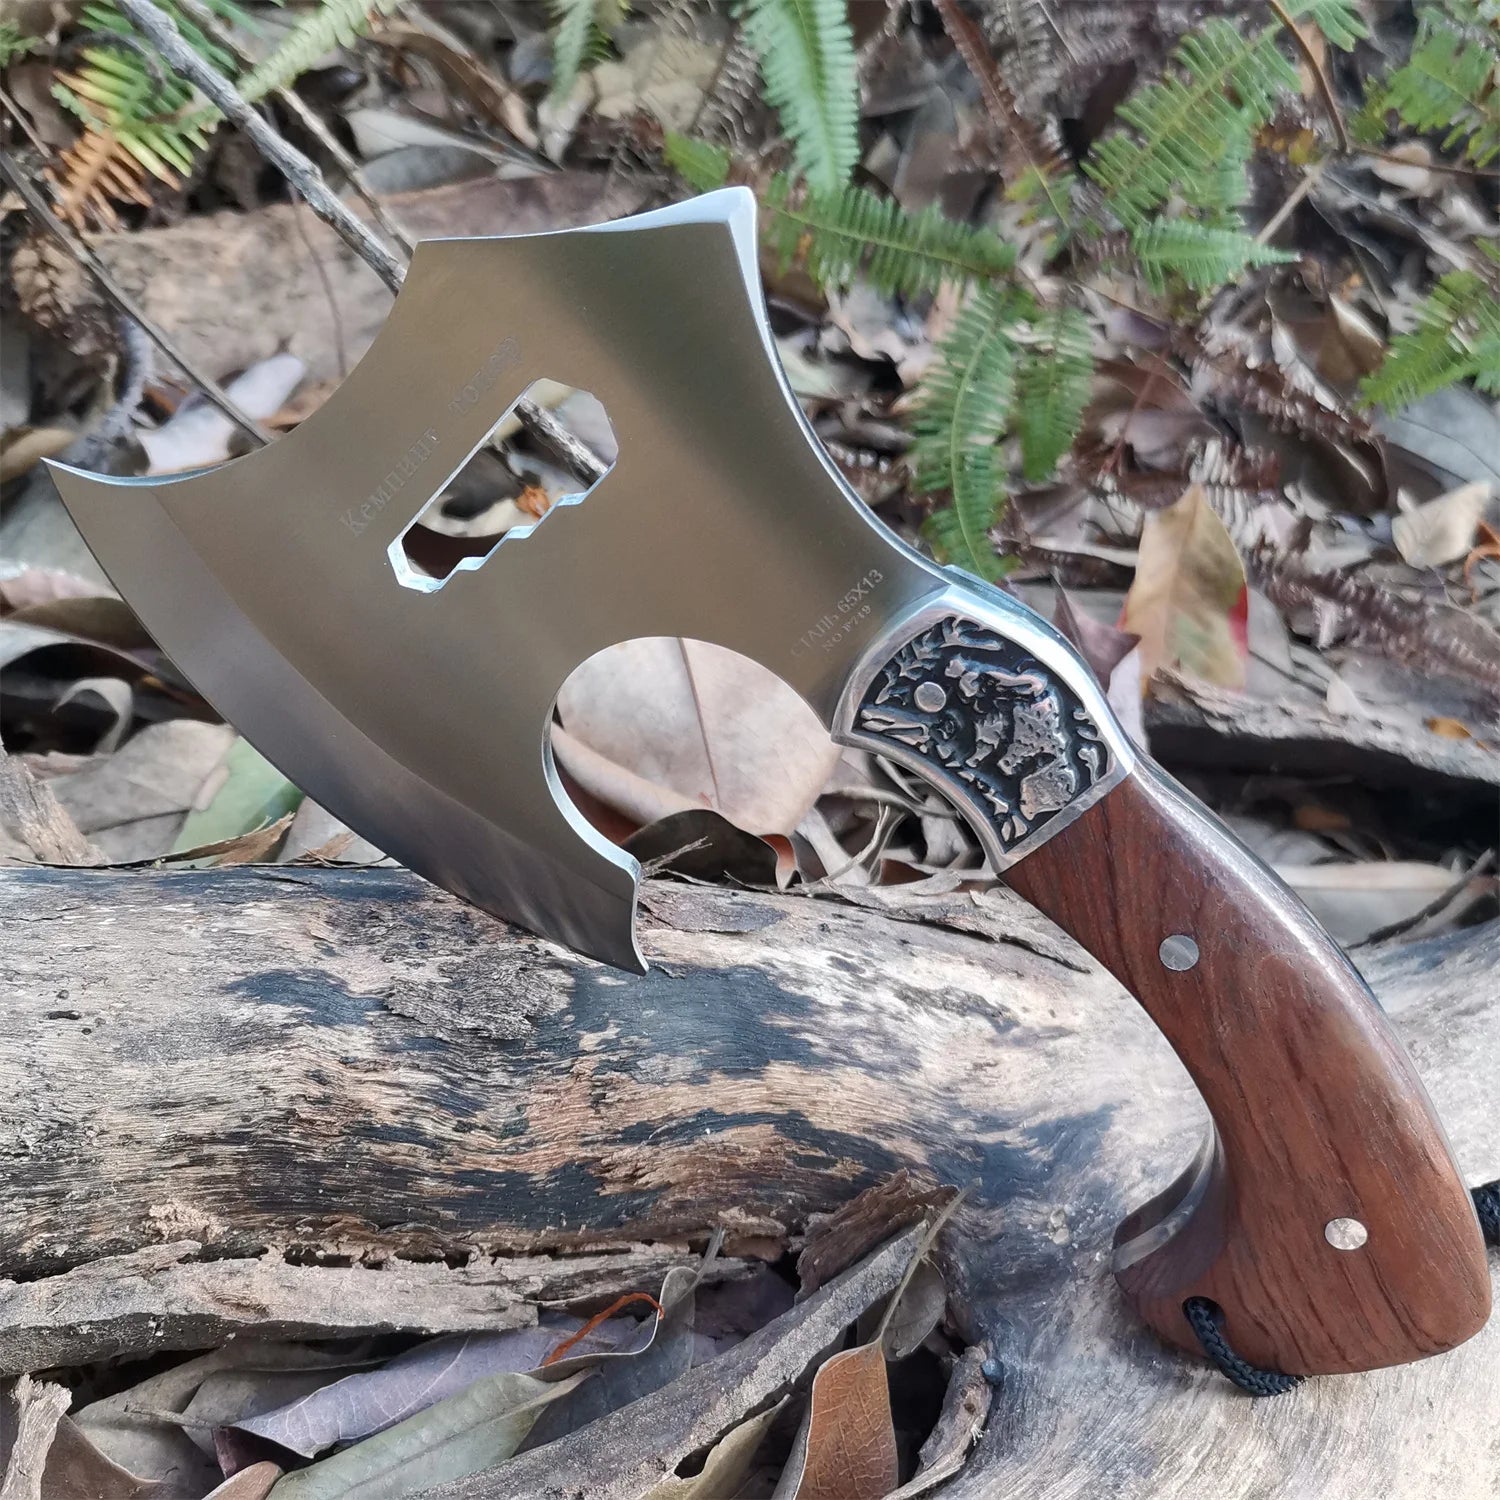 Camping Hatchet, Forged Steel Construction Survival Hatchet, with Nylon Sheath, Anti-Slip & Shock Reduction Grip, Tactical Axe